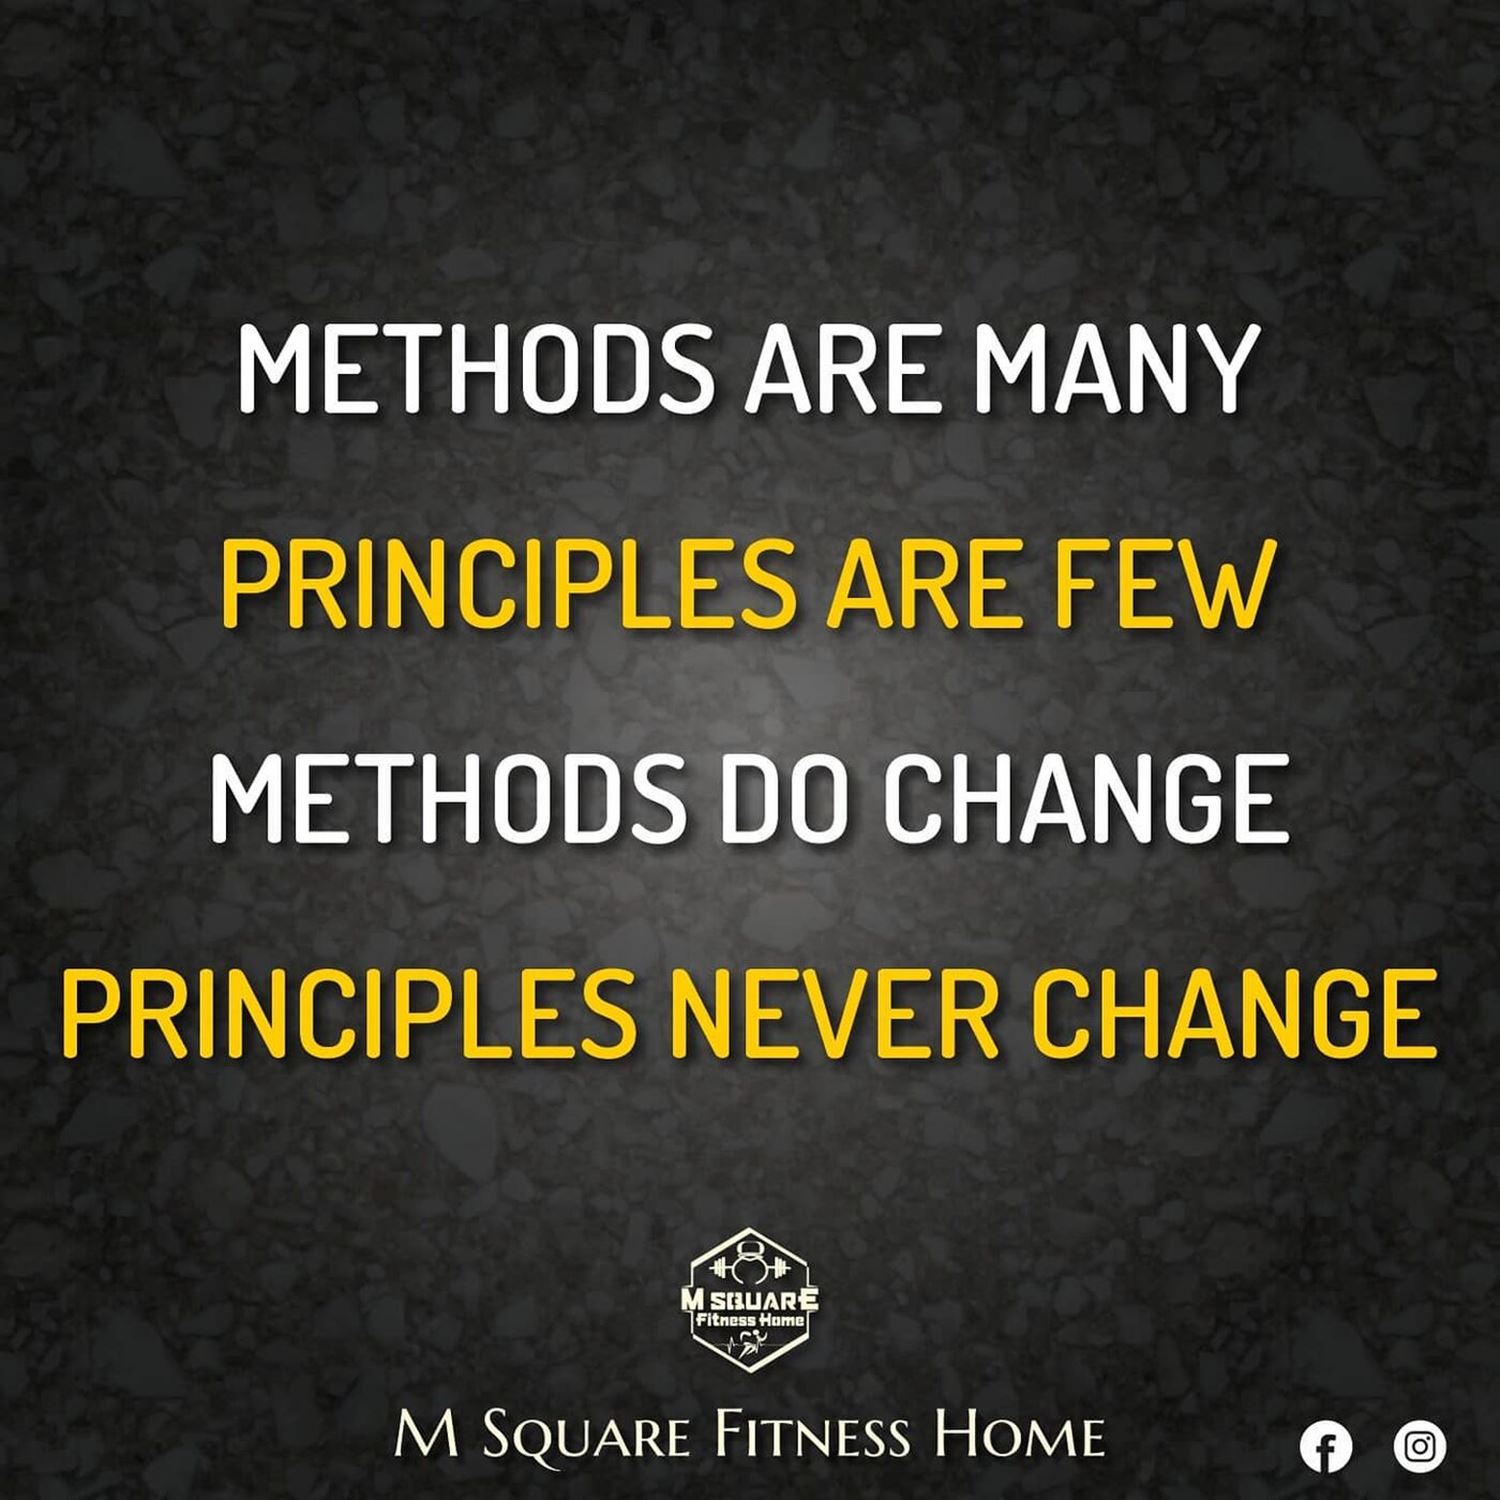 Methods are many, concepts/principles are few